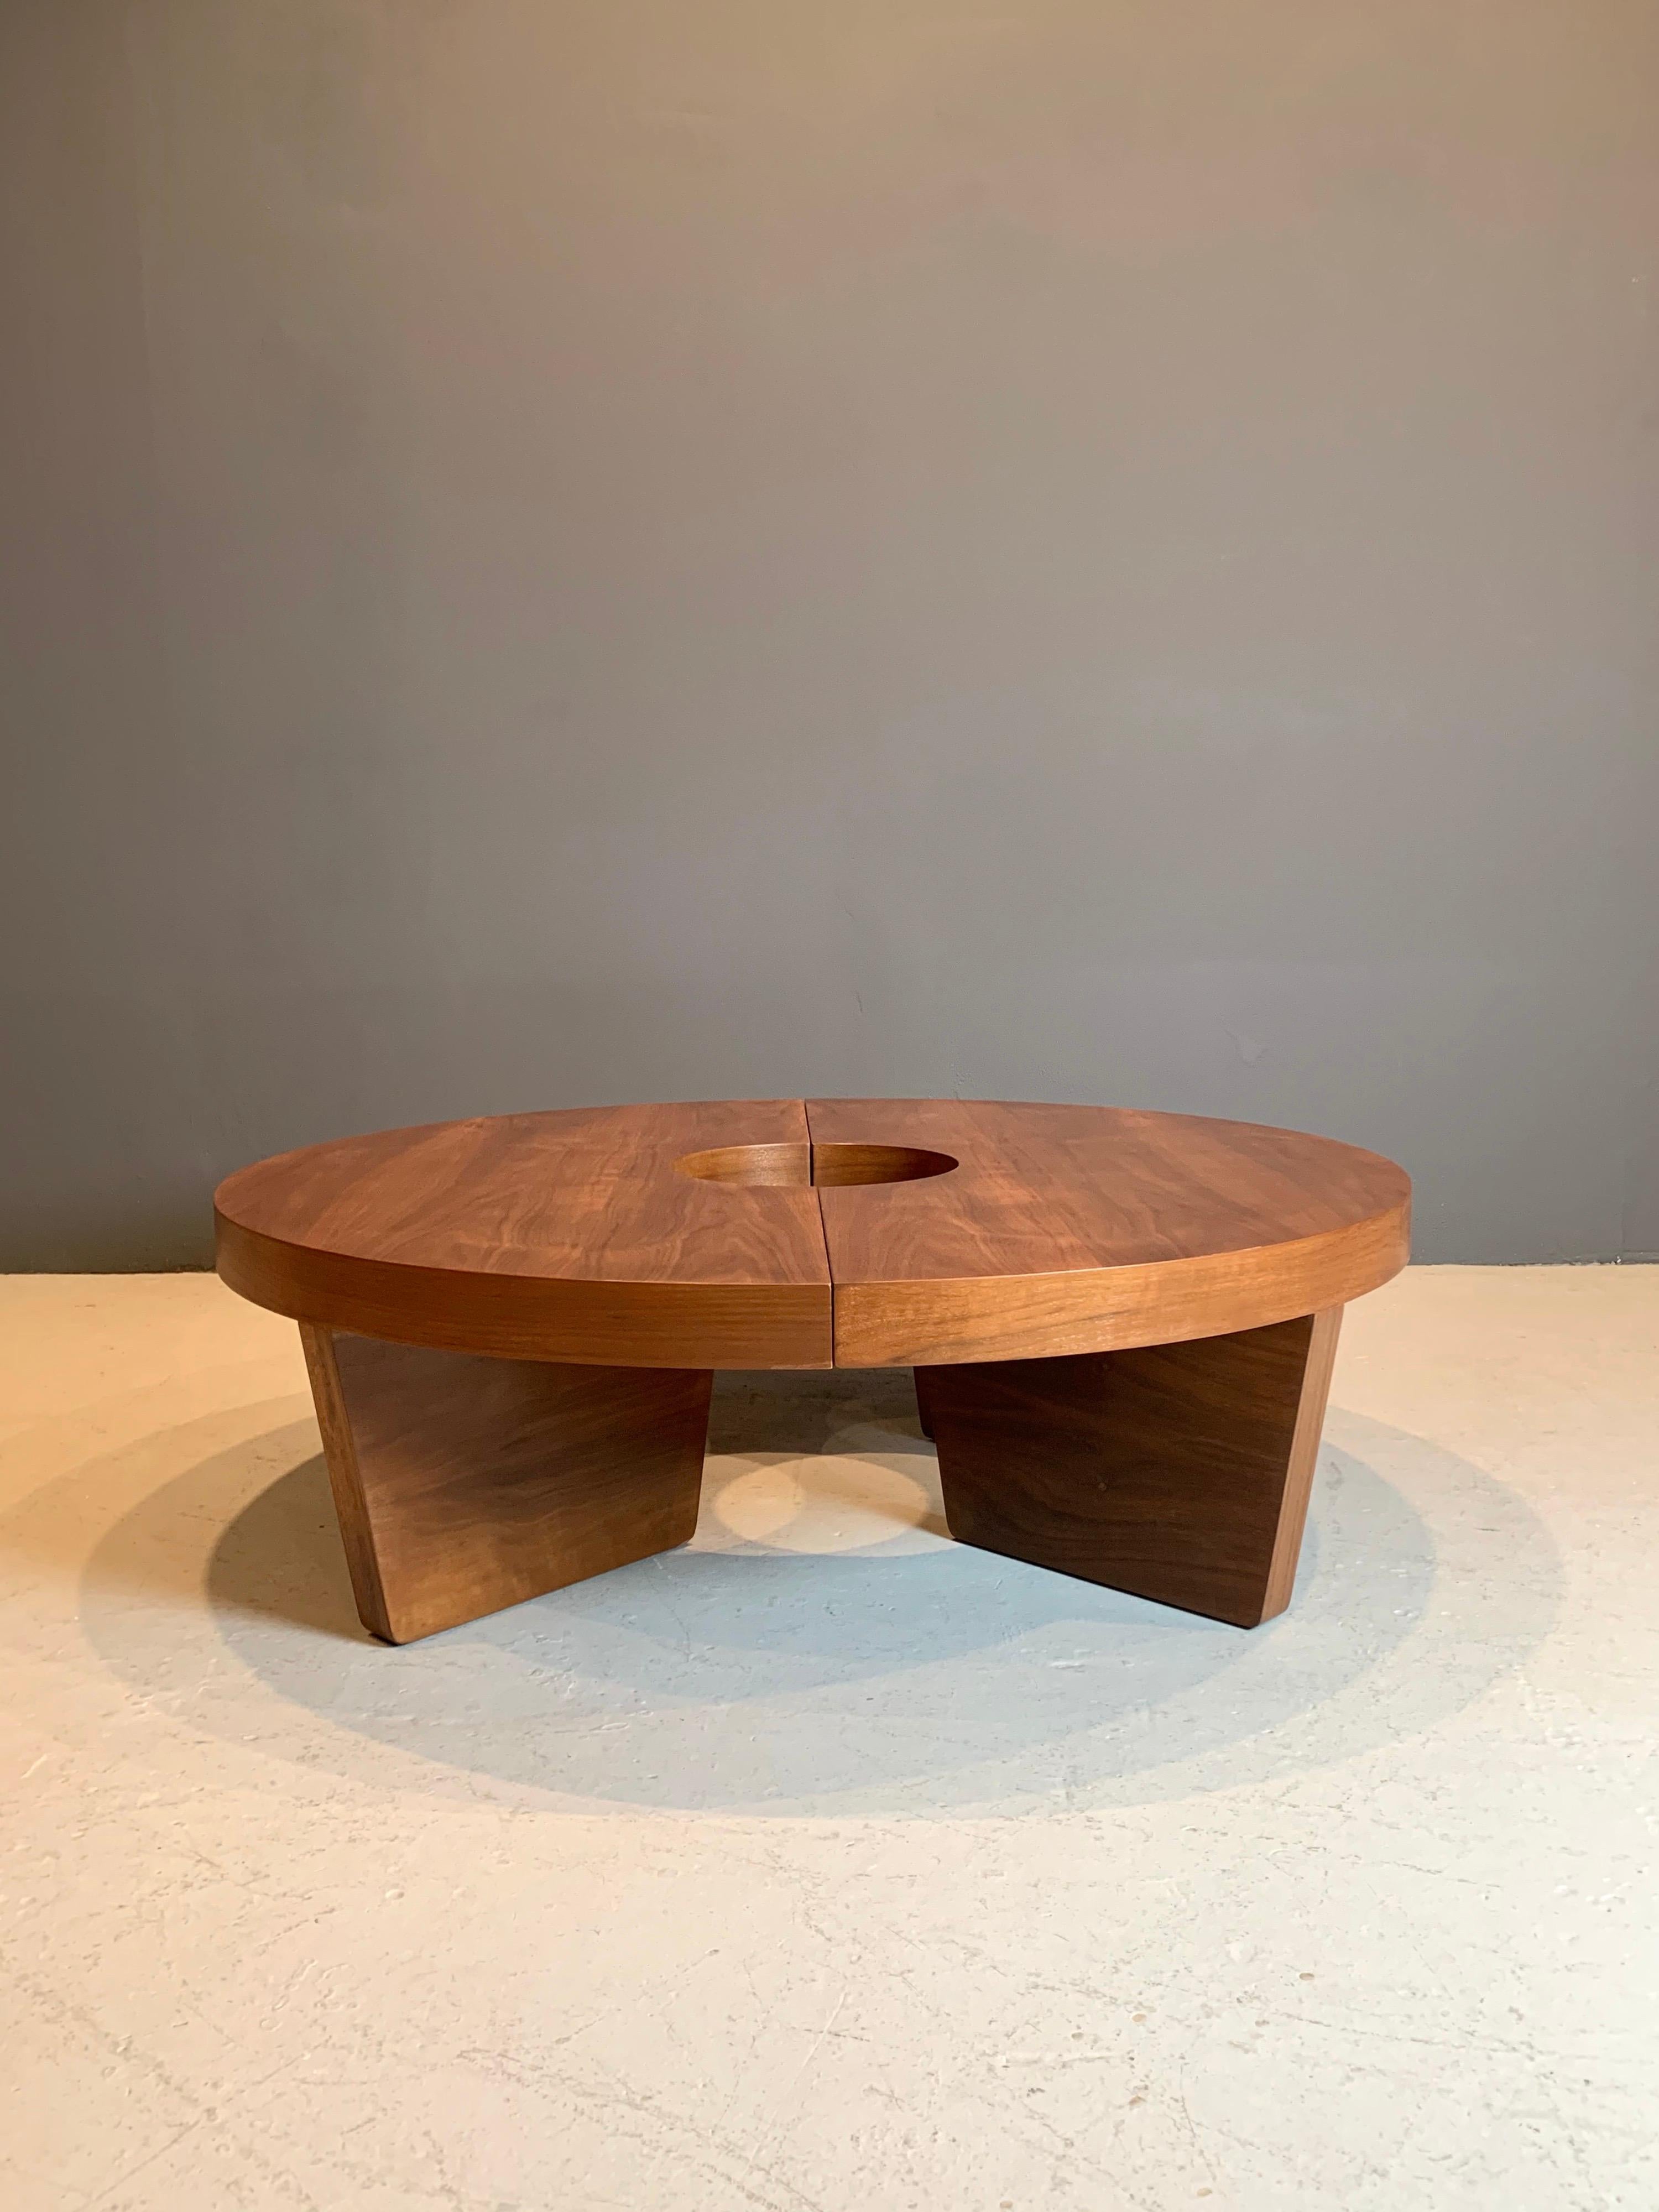 Newly refinished Harvey Probber “Nuclear” coffee table, model number 201, designed in 1949 and manufactured by Harvey Probber Inc, NY.
Two parts in veneered walnut with beautiful grain, refinished in natural.
This table is available to view in my